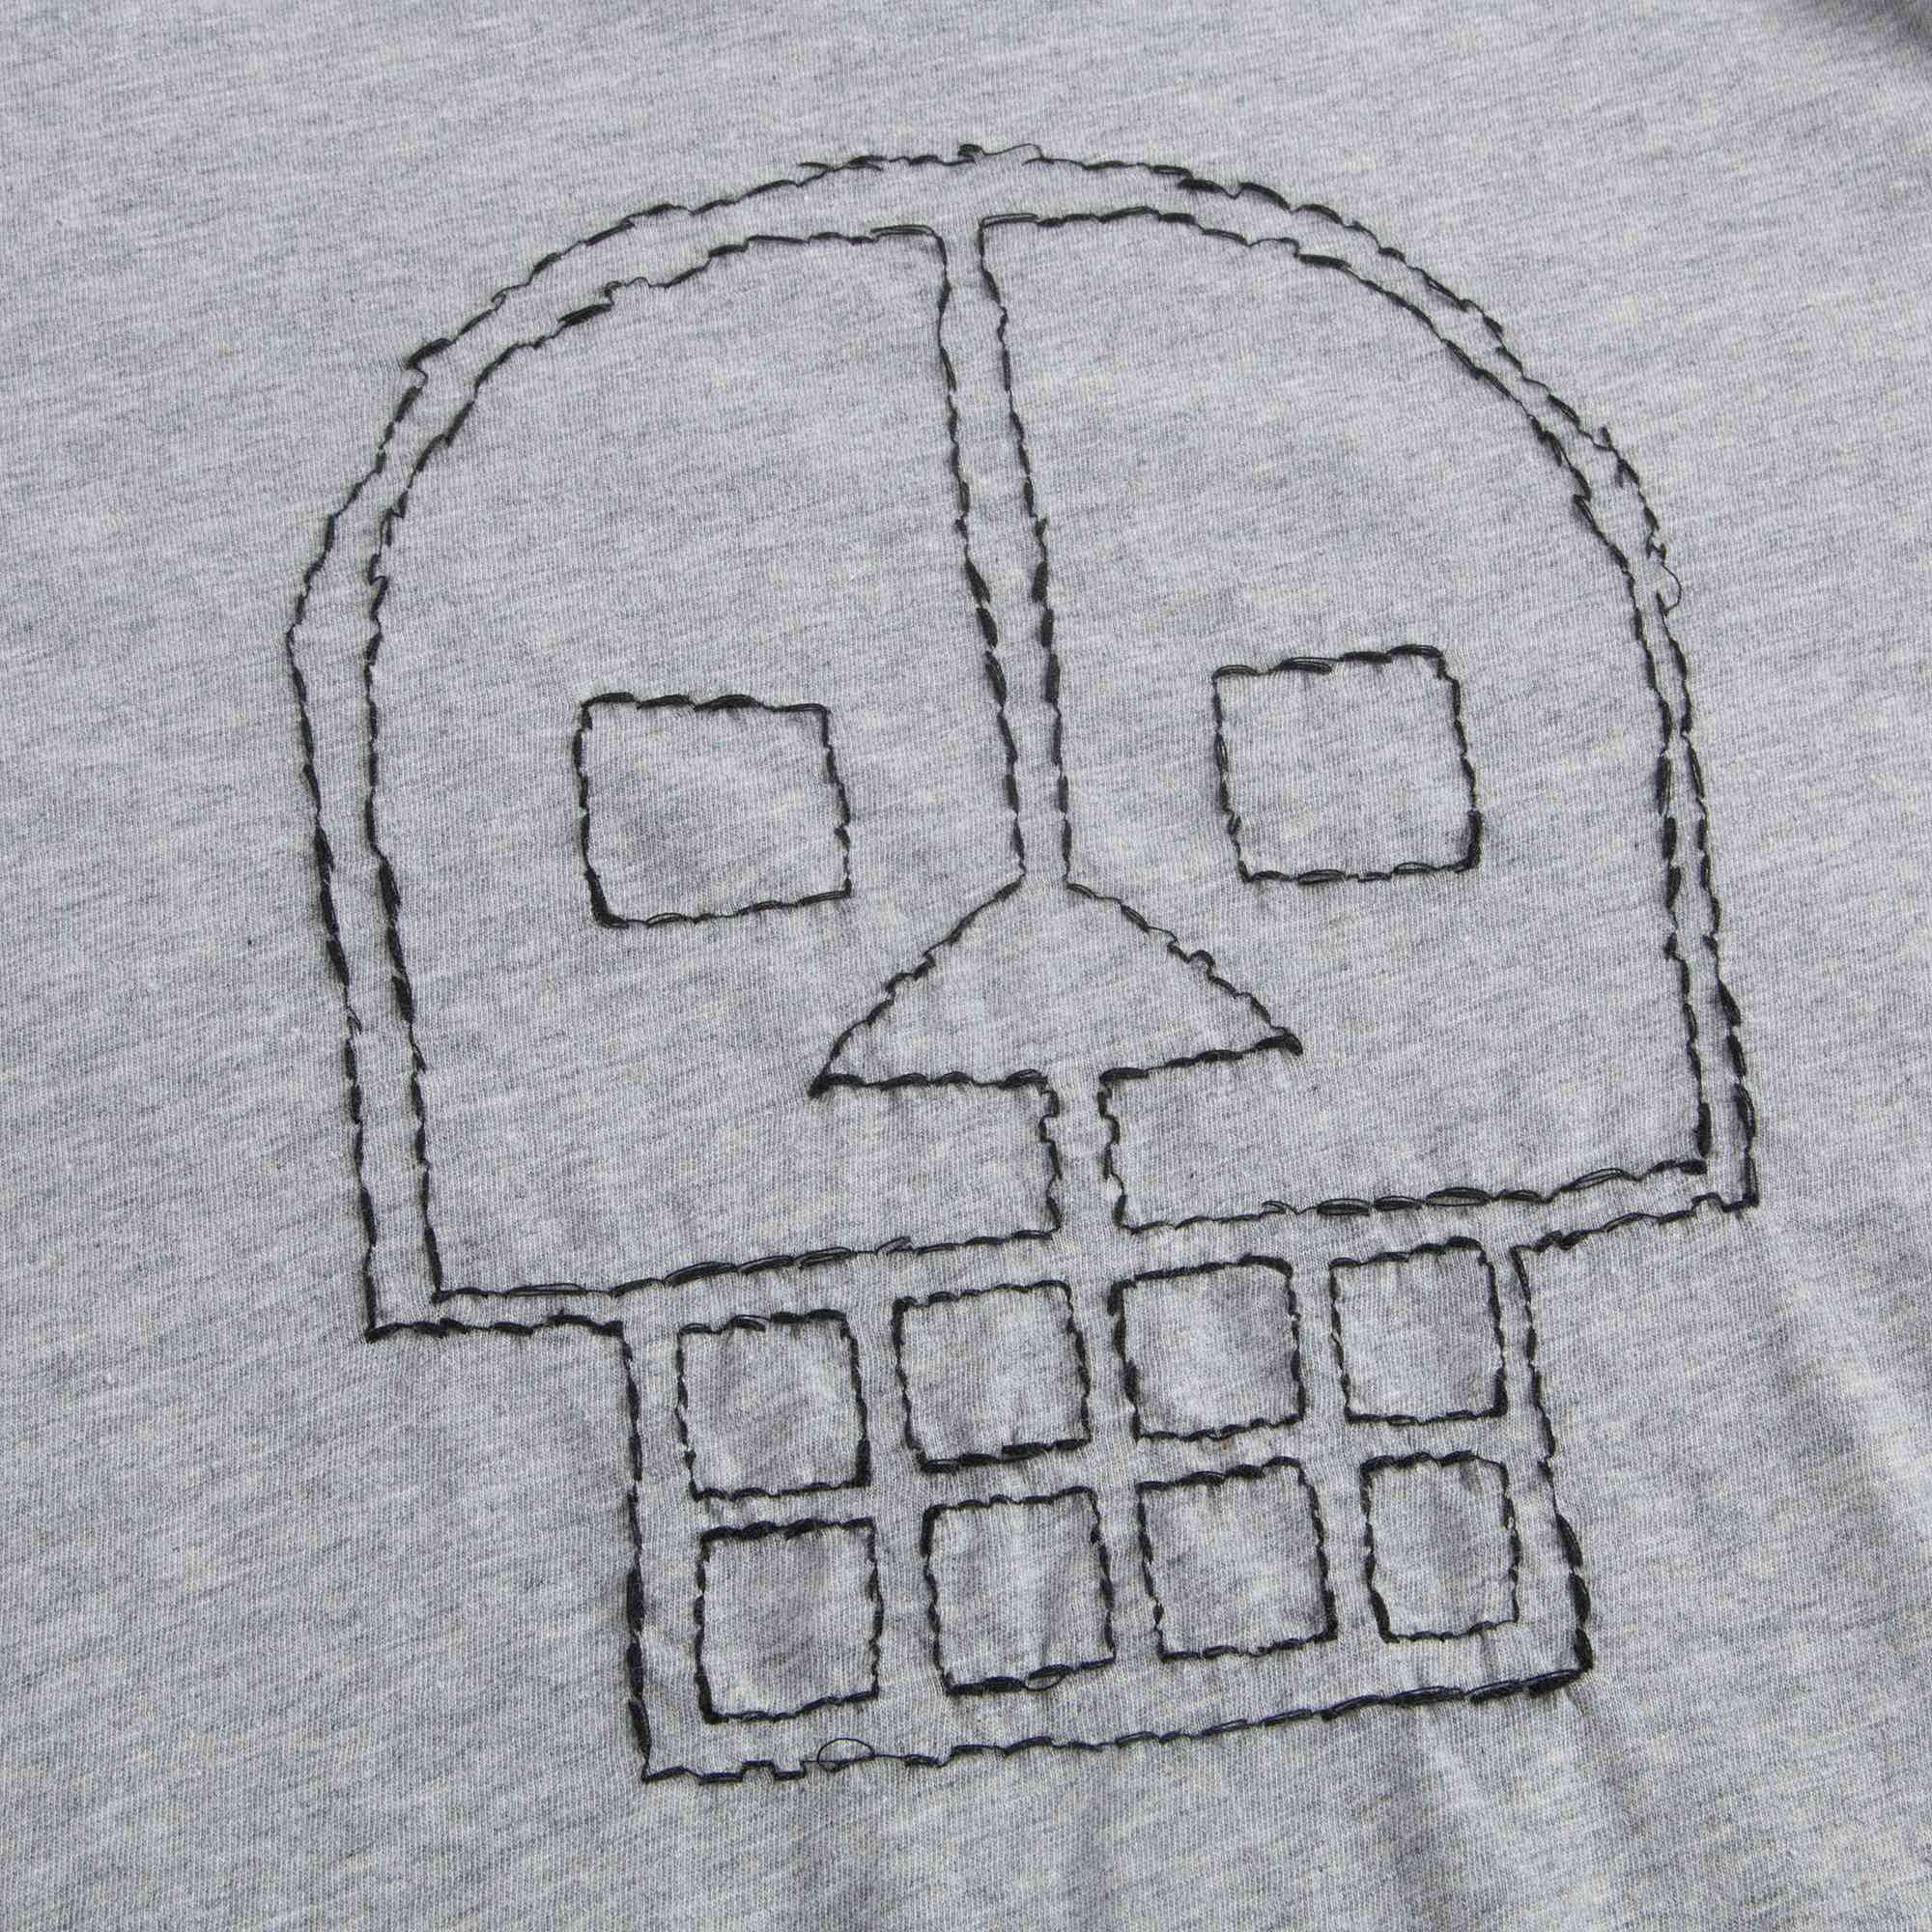 Boys Heather Grey Cotton Embroidered Skull T-shirt